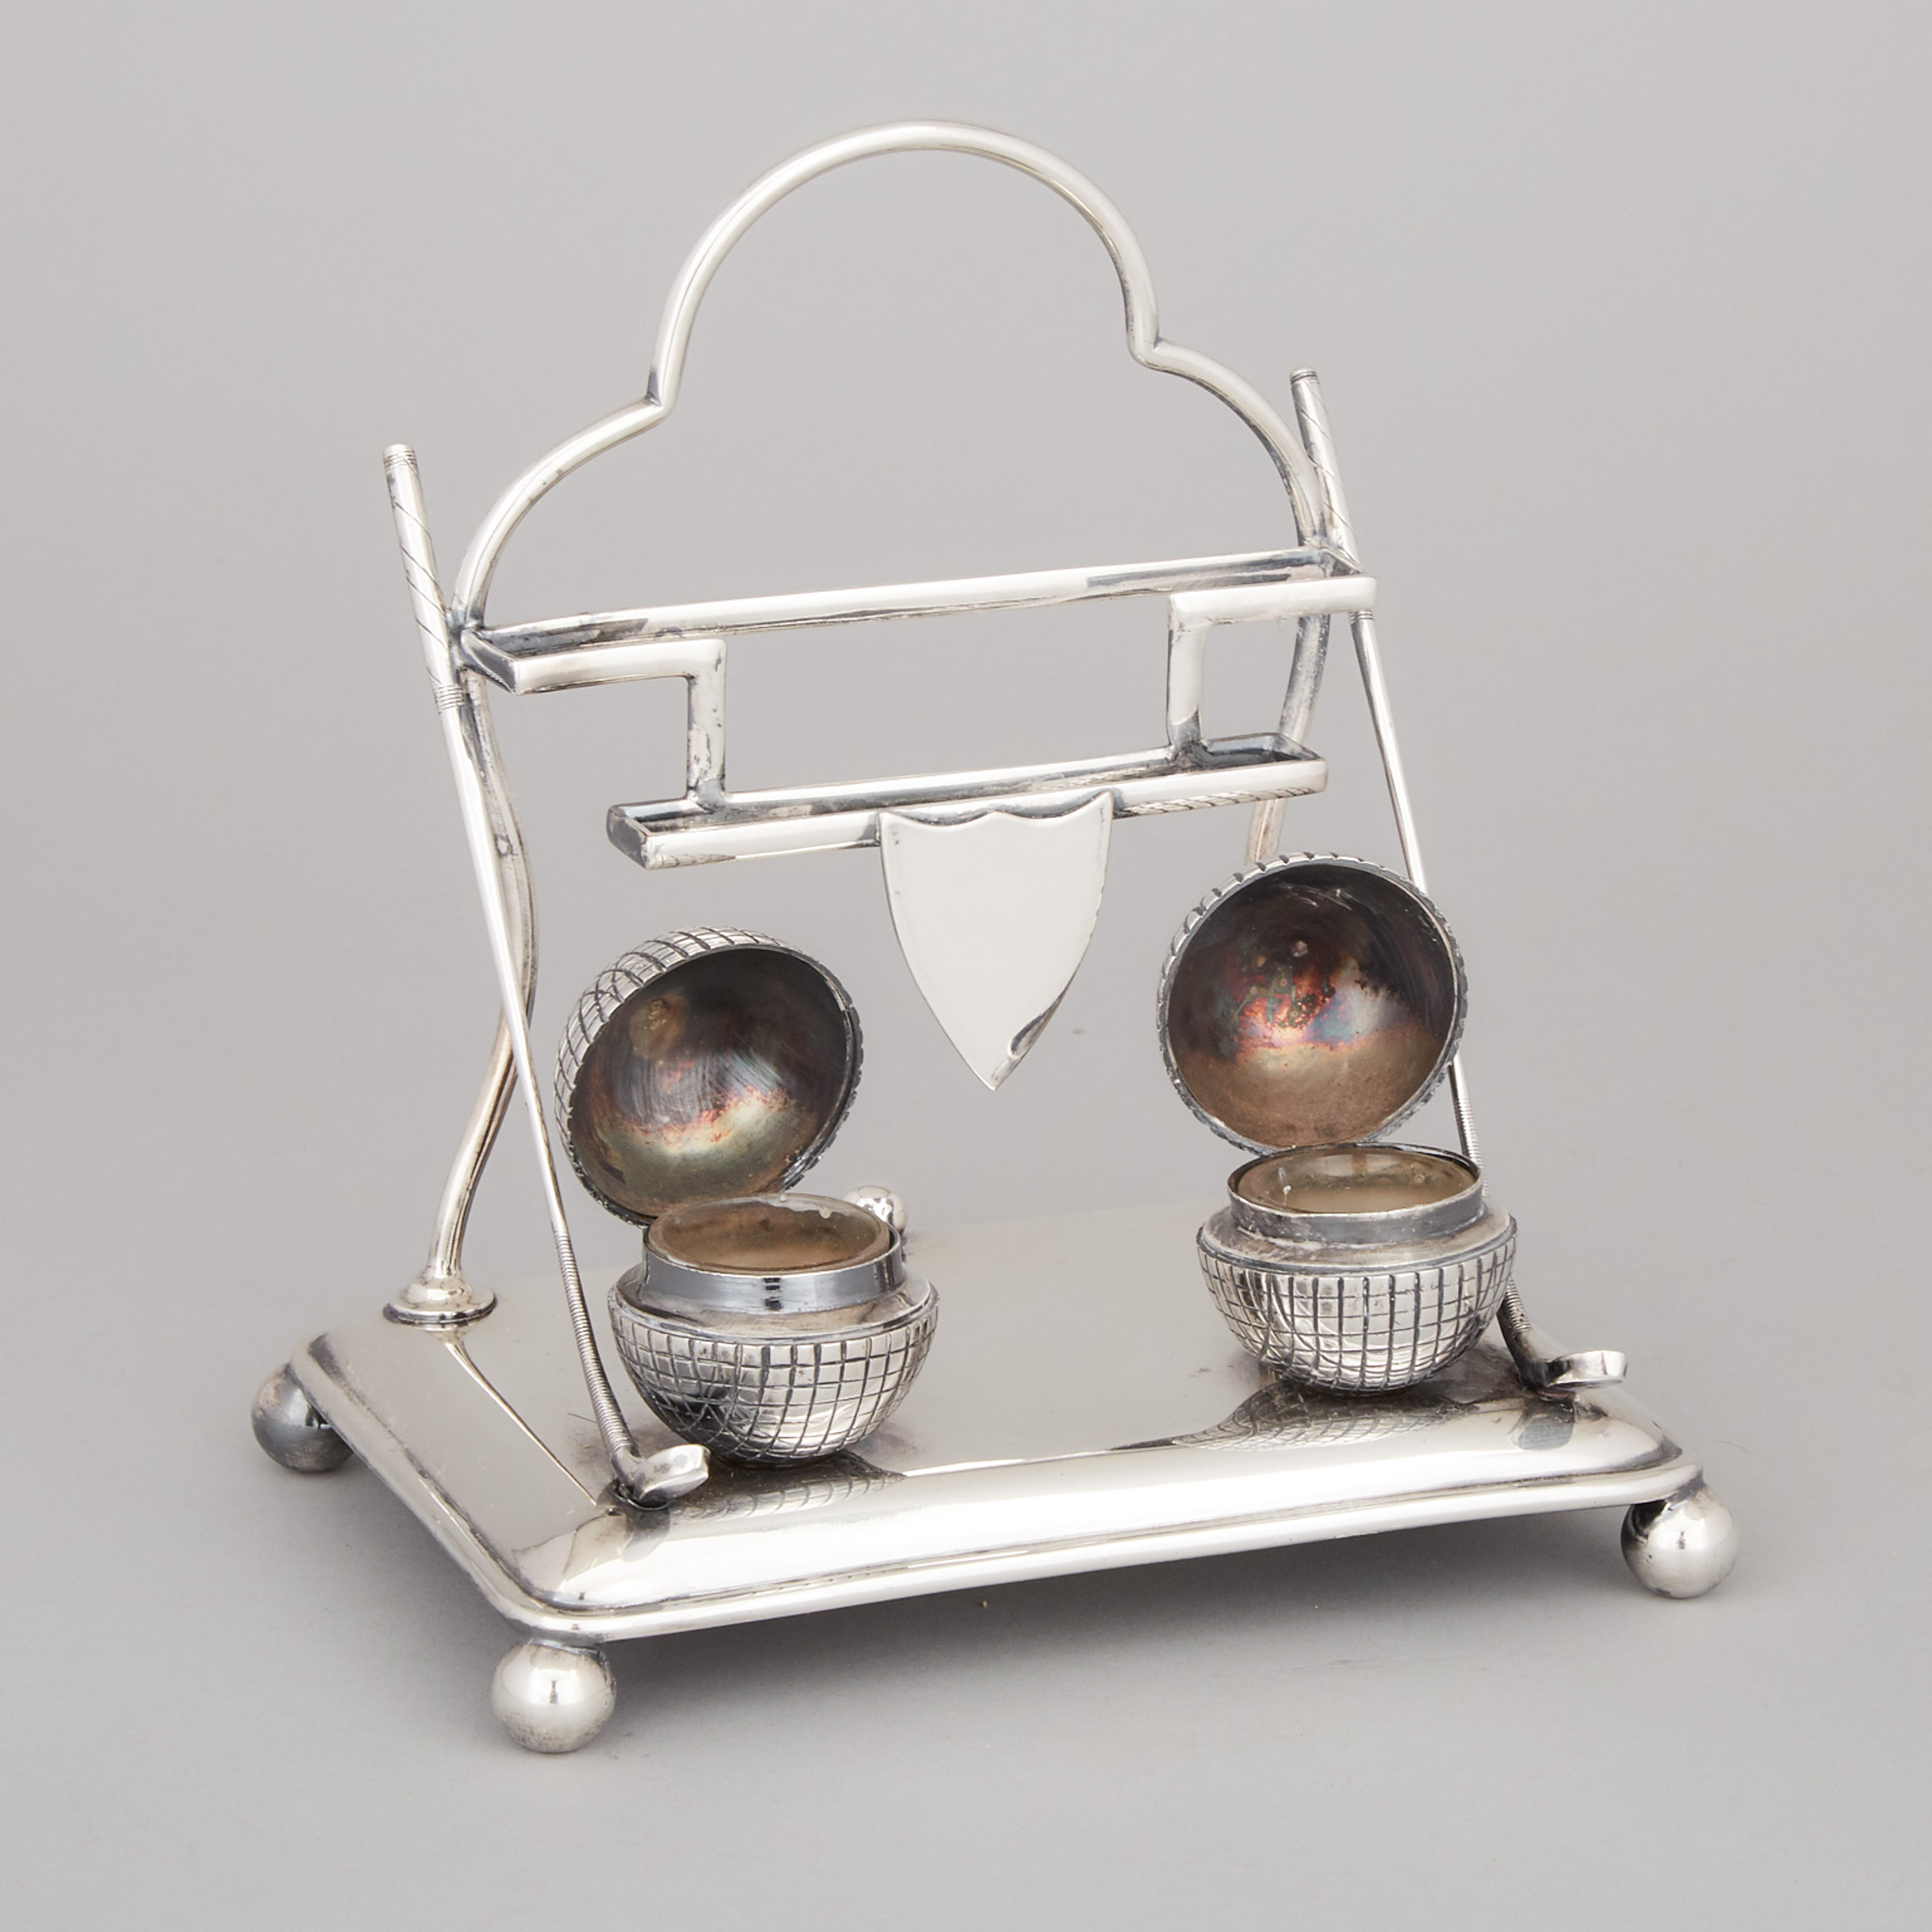 Edwardian Silver Plate Golfer's Desk Stand, early 20th century